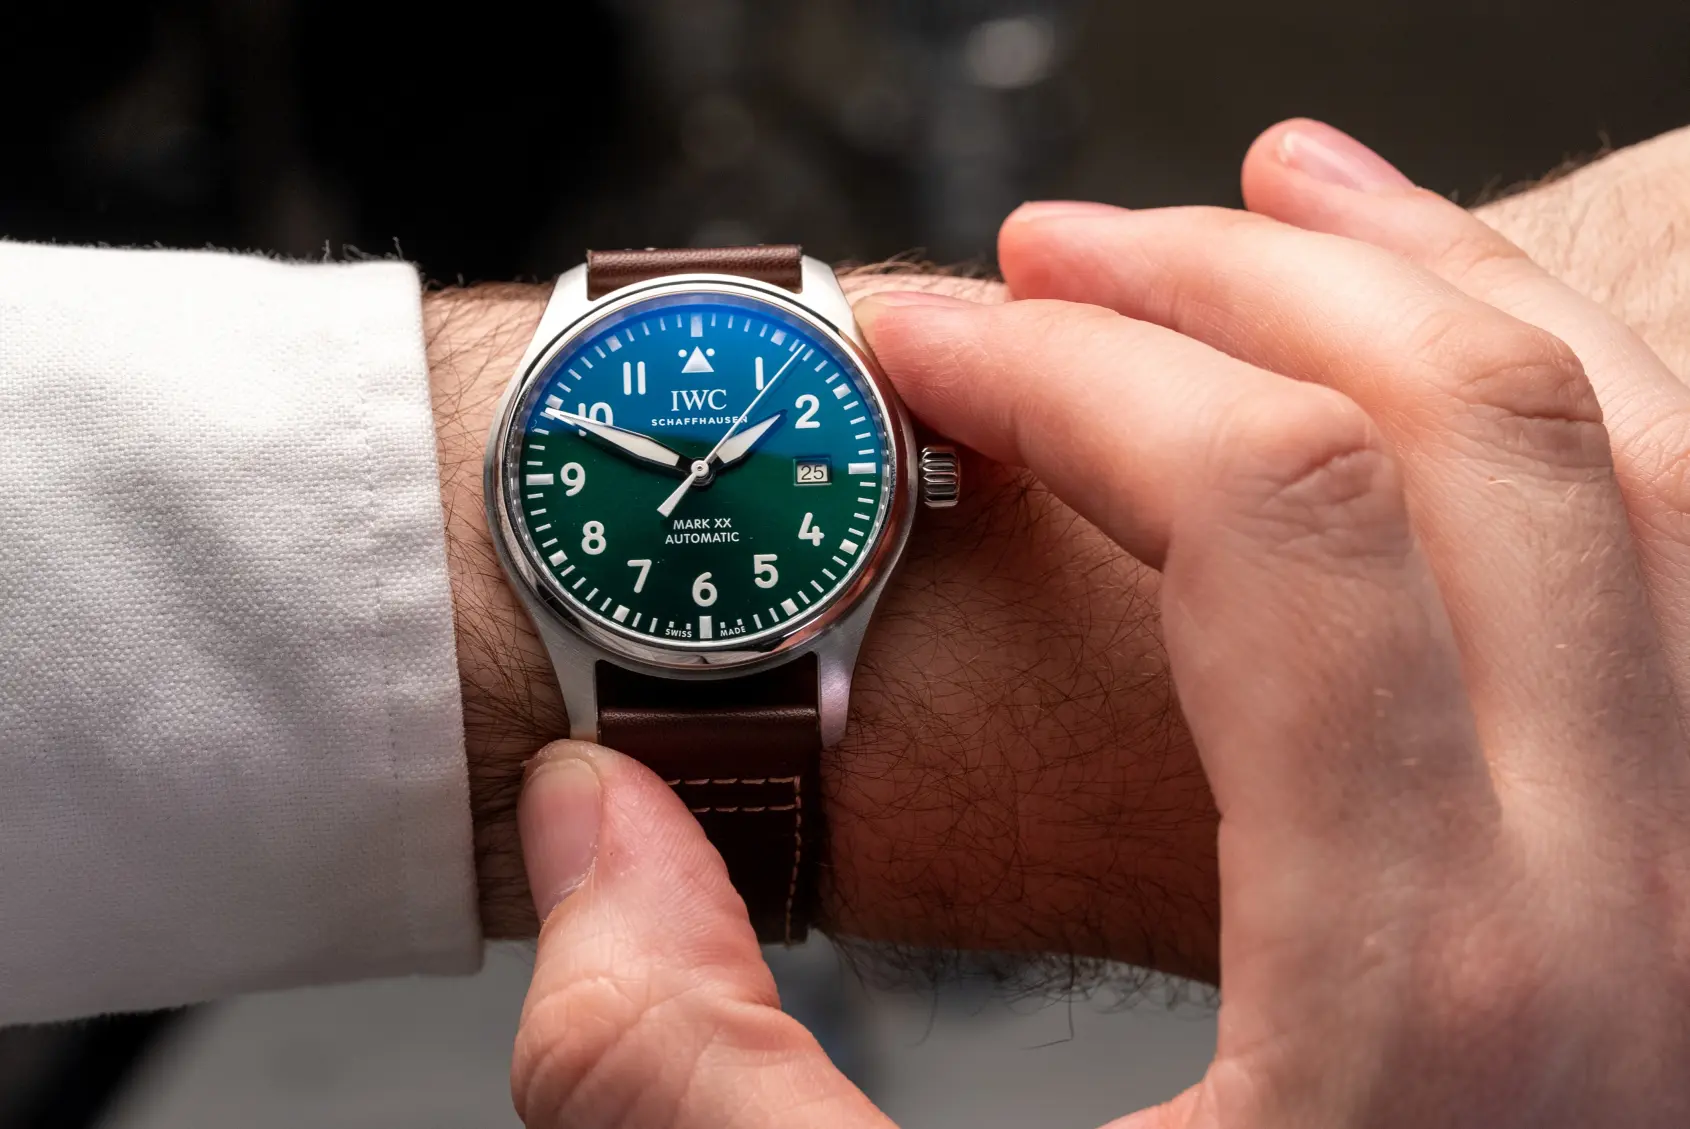 Will you consider an IWC over Rolex or Omega or any other big-name brands  based on environmental rating??